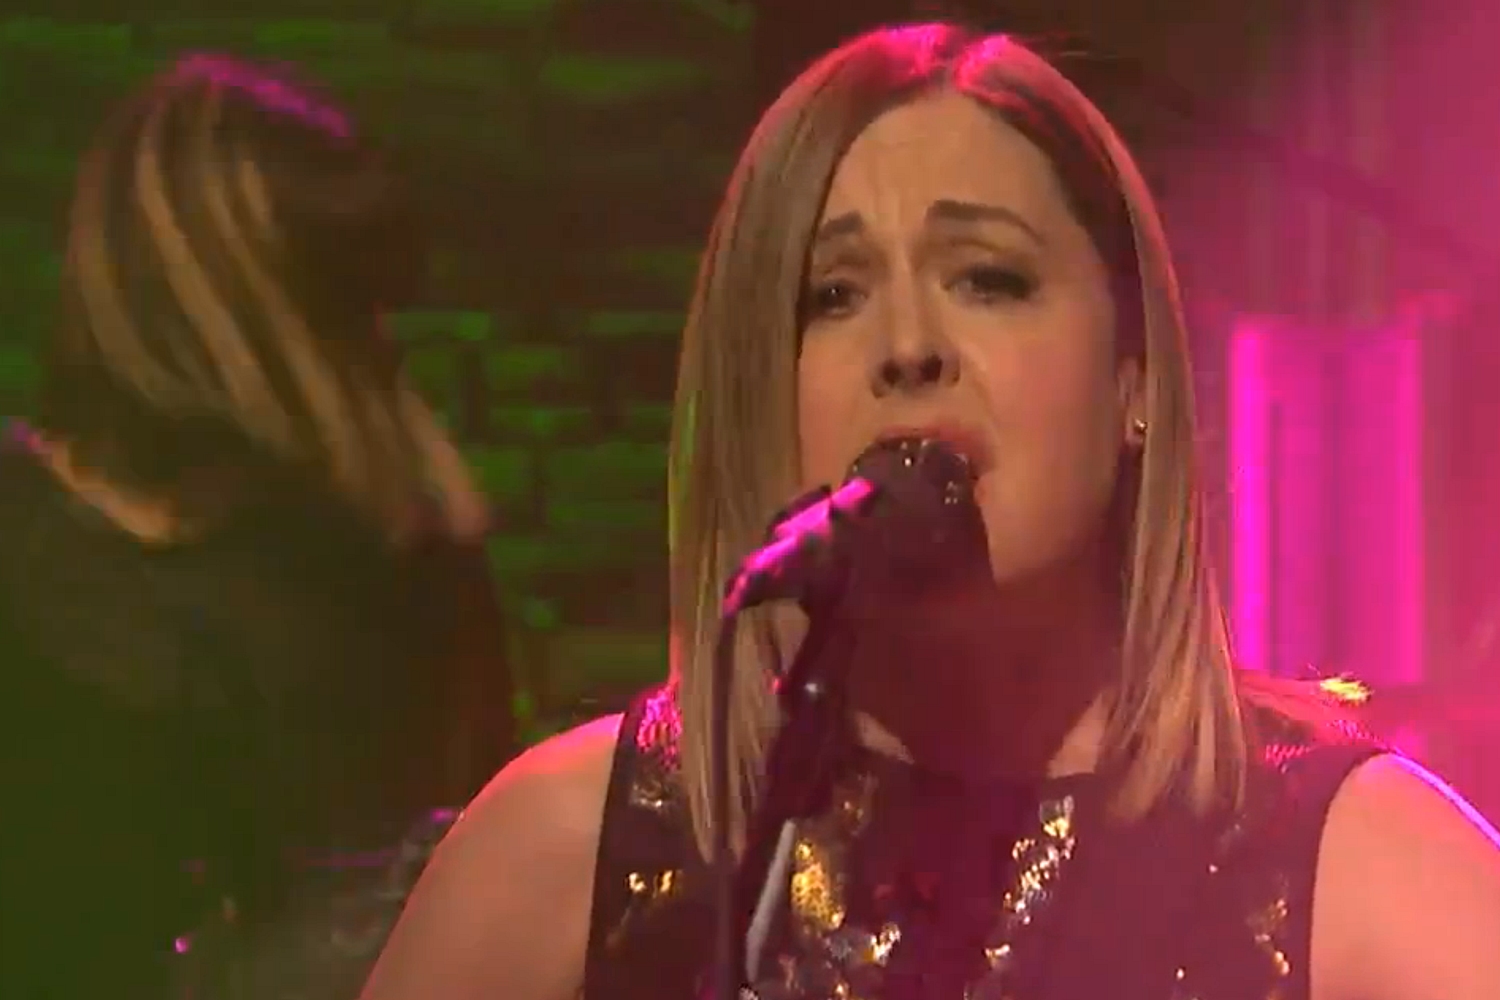 Watch Sleater-Kinney play ‘Price Tag’ on Late Night With Seth Meyers